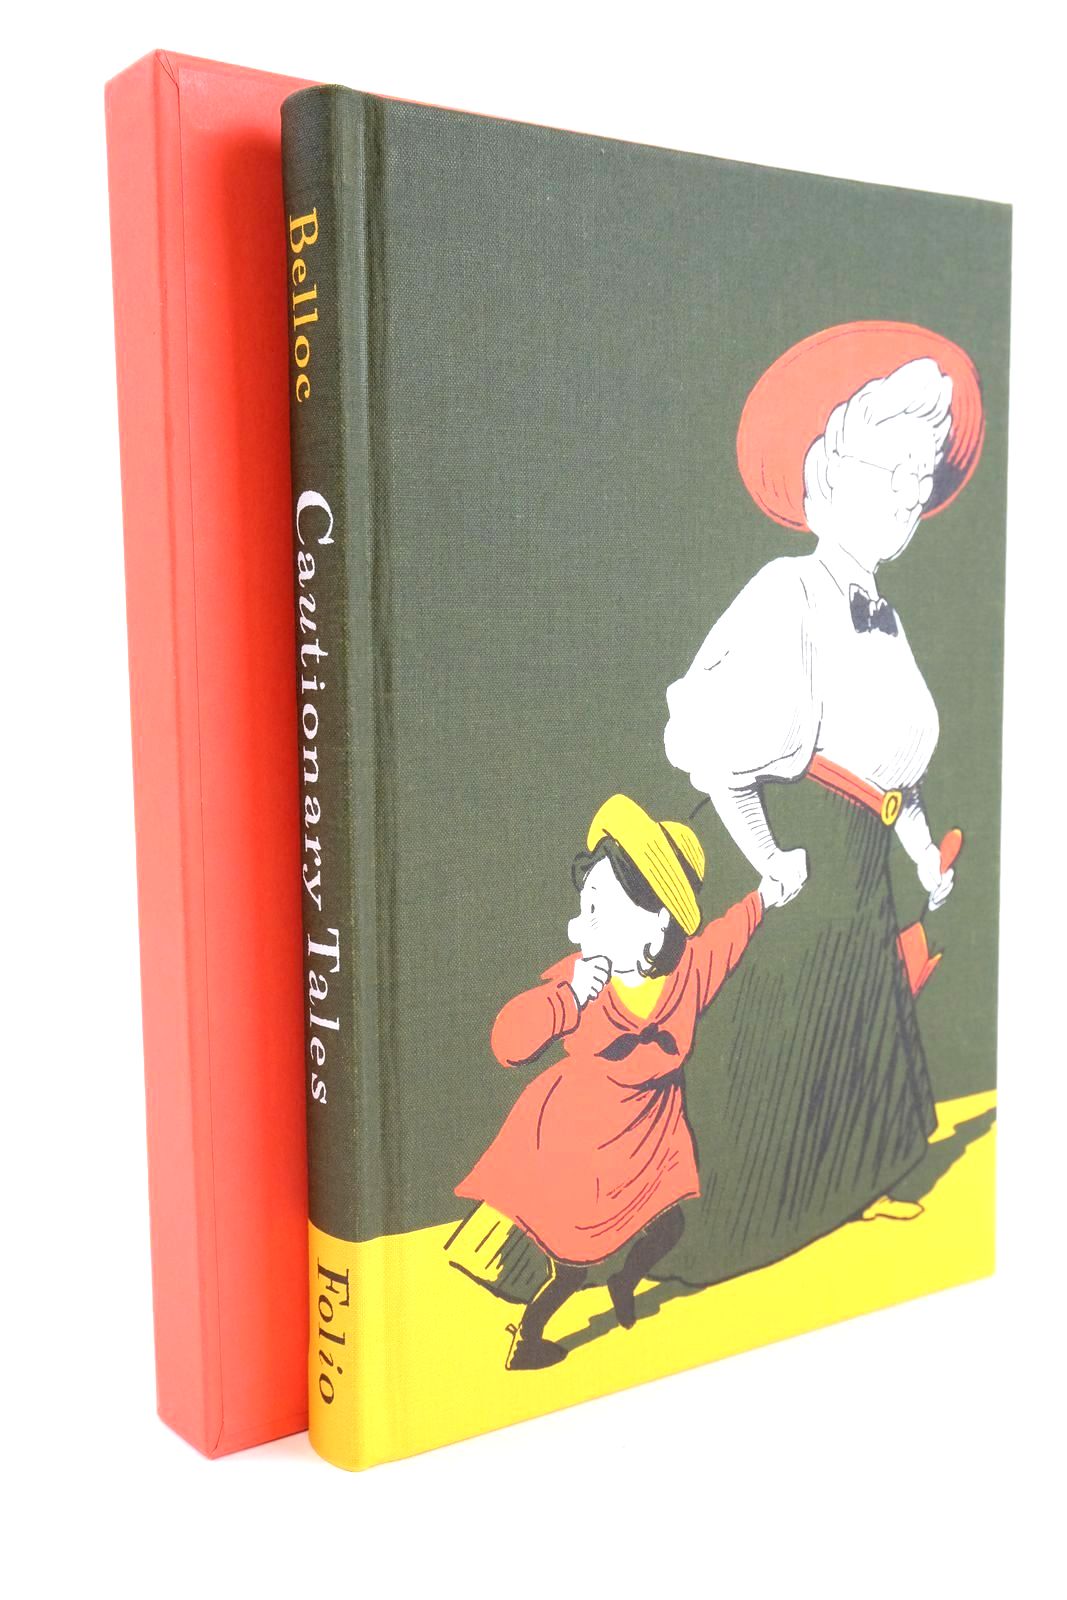 Photo of CAUTIONARY TALES AND OTHER VERSES written by Belloc, Hilaire illustrated by Simmonds, Posy published by Folio Society (STOCK CODE: 1324641)  for sale by Stella & Rose's Books